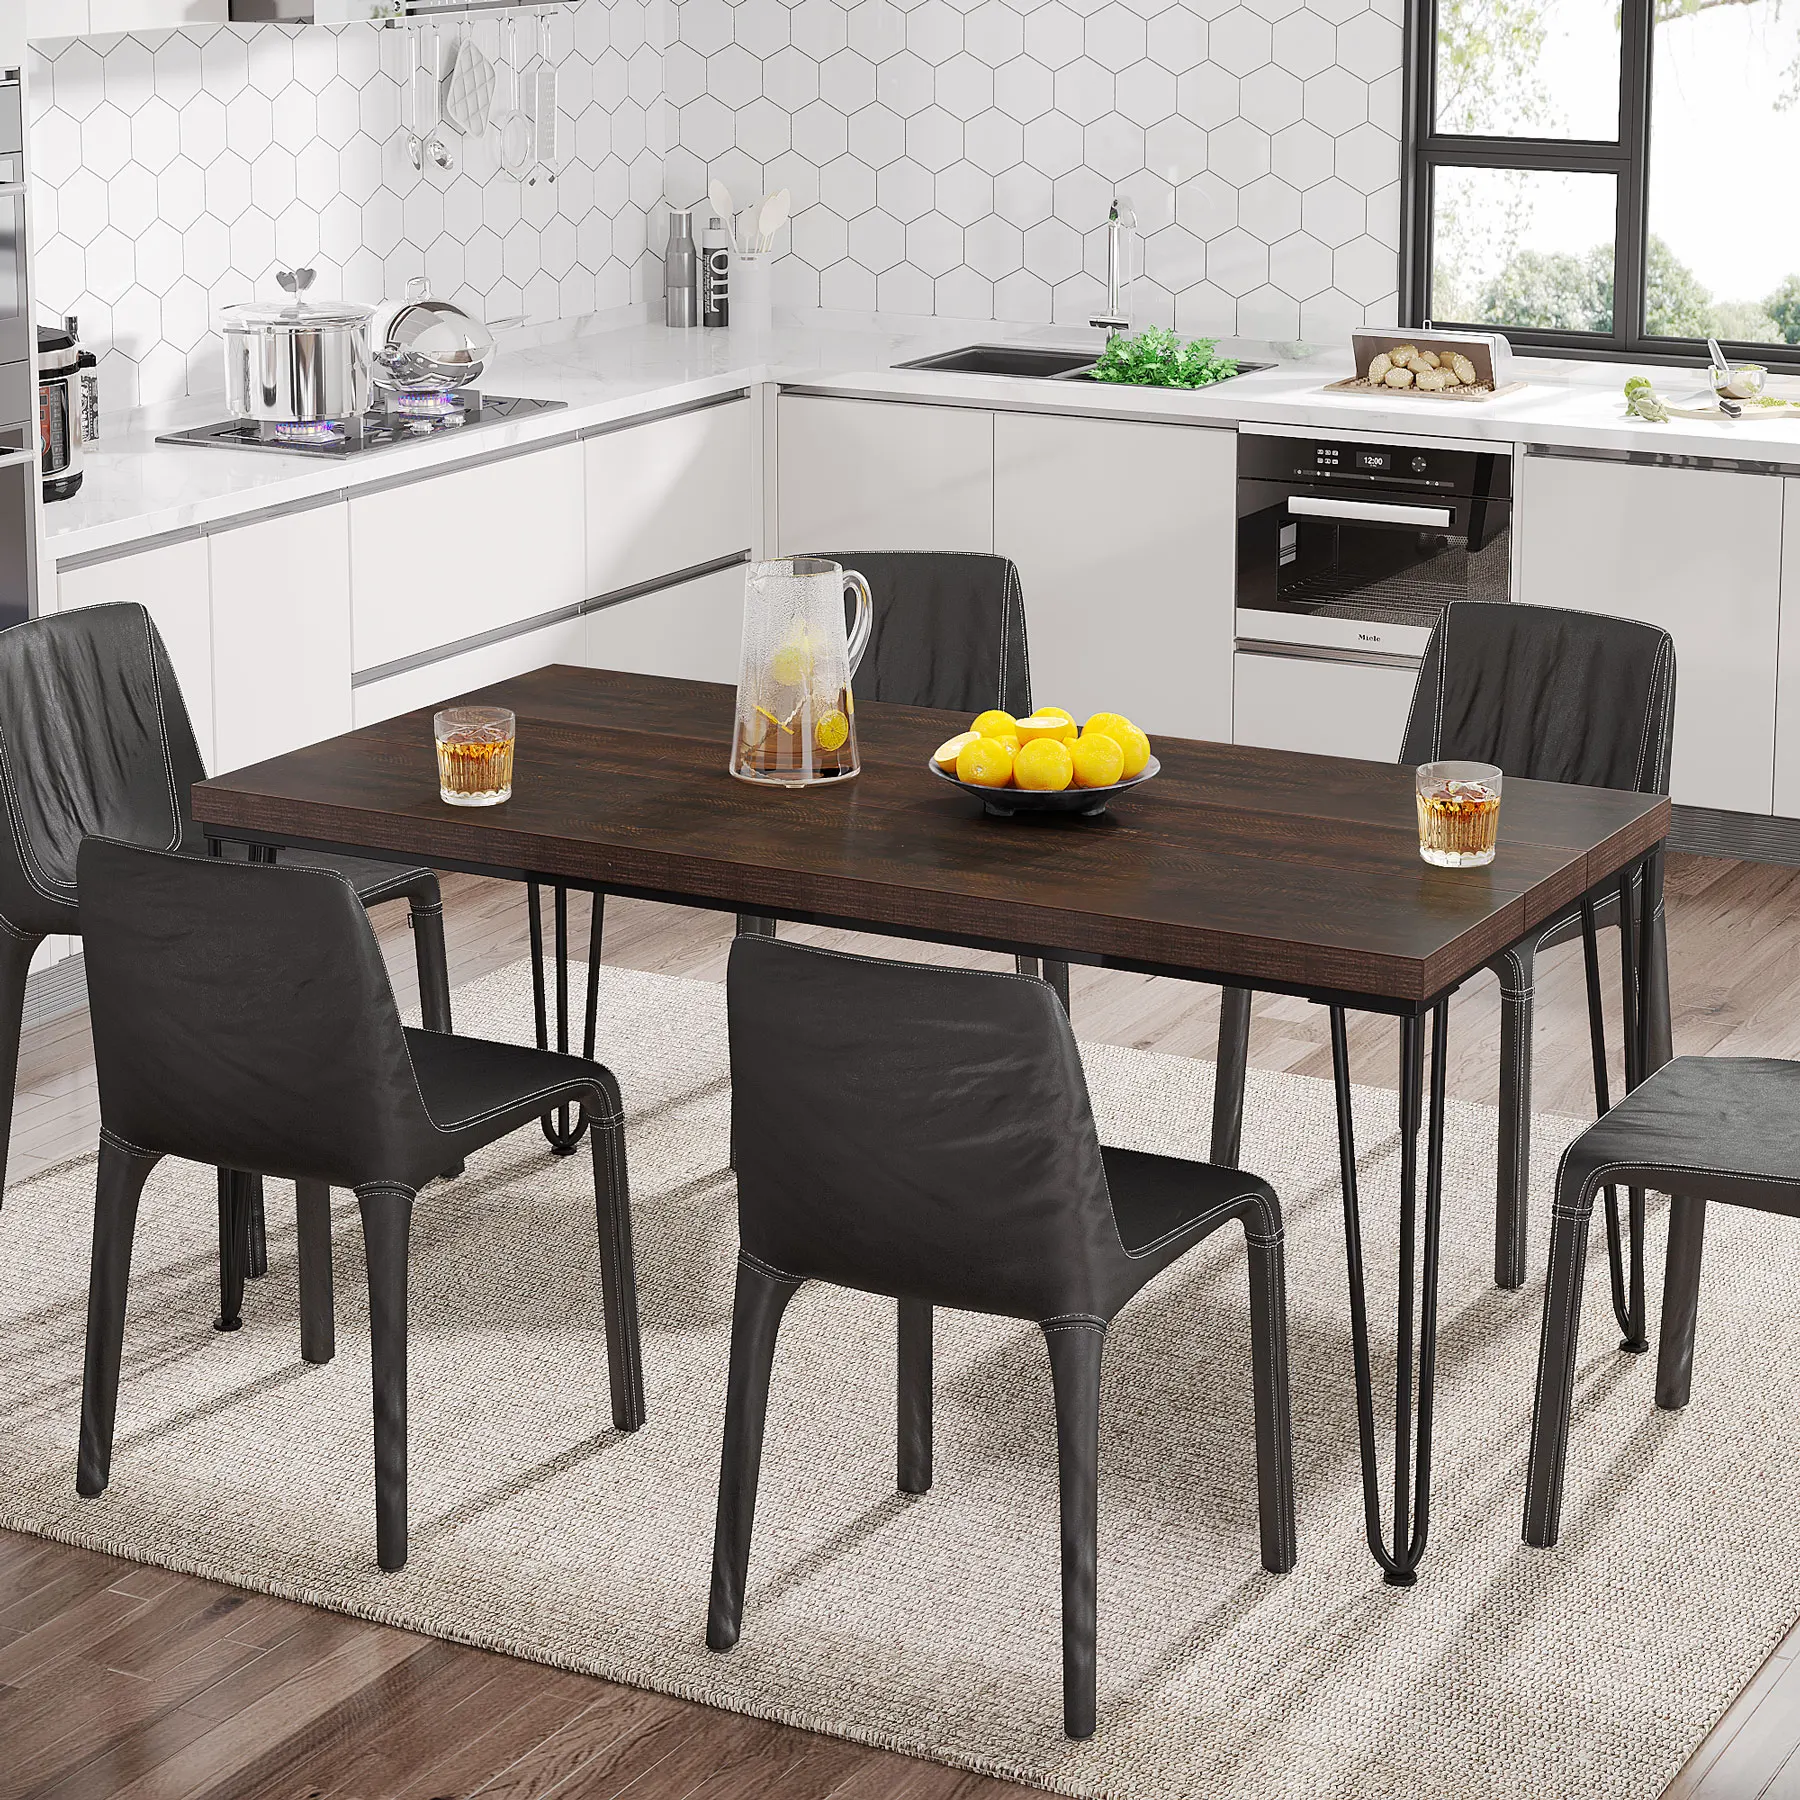 New Home Kitchen Hotel Modern Square Wood Restaurant Dining Tables For 6